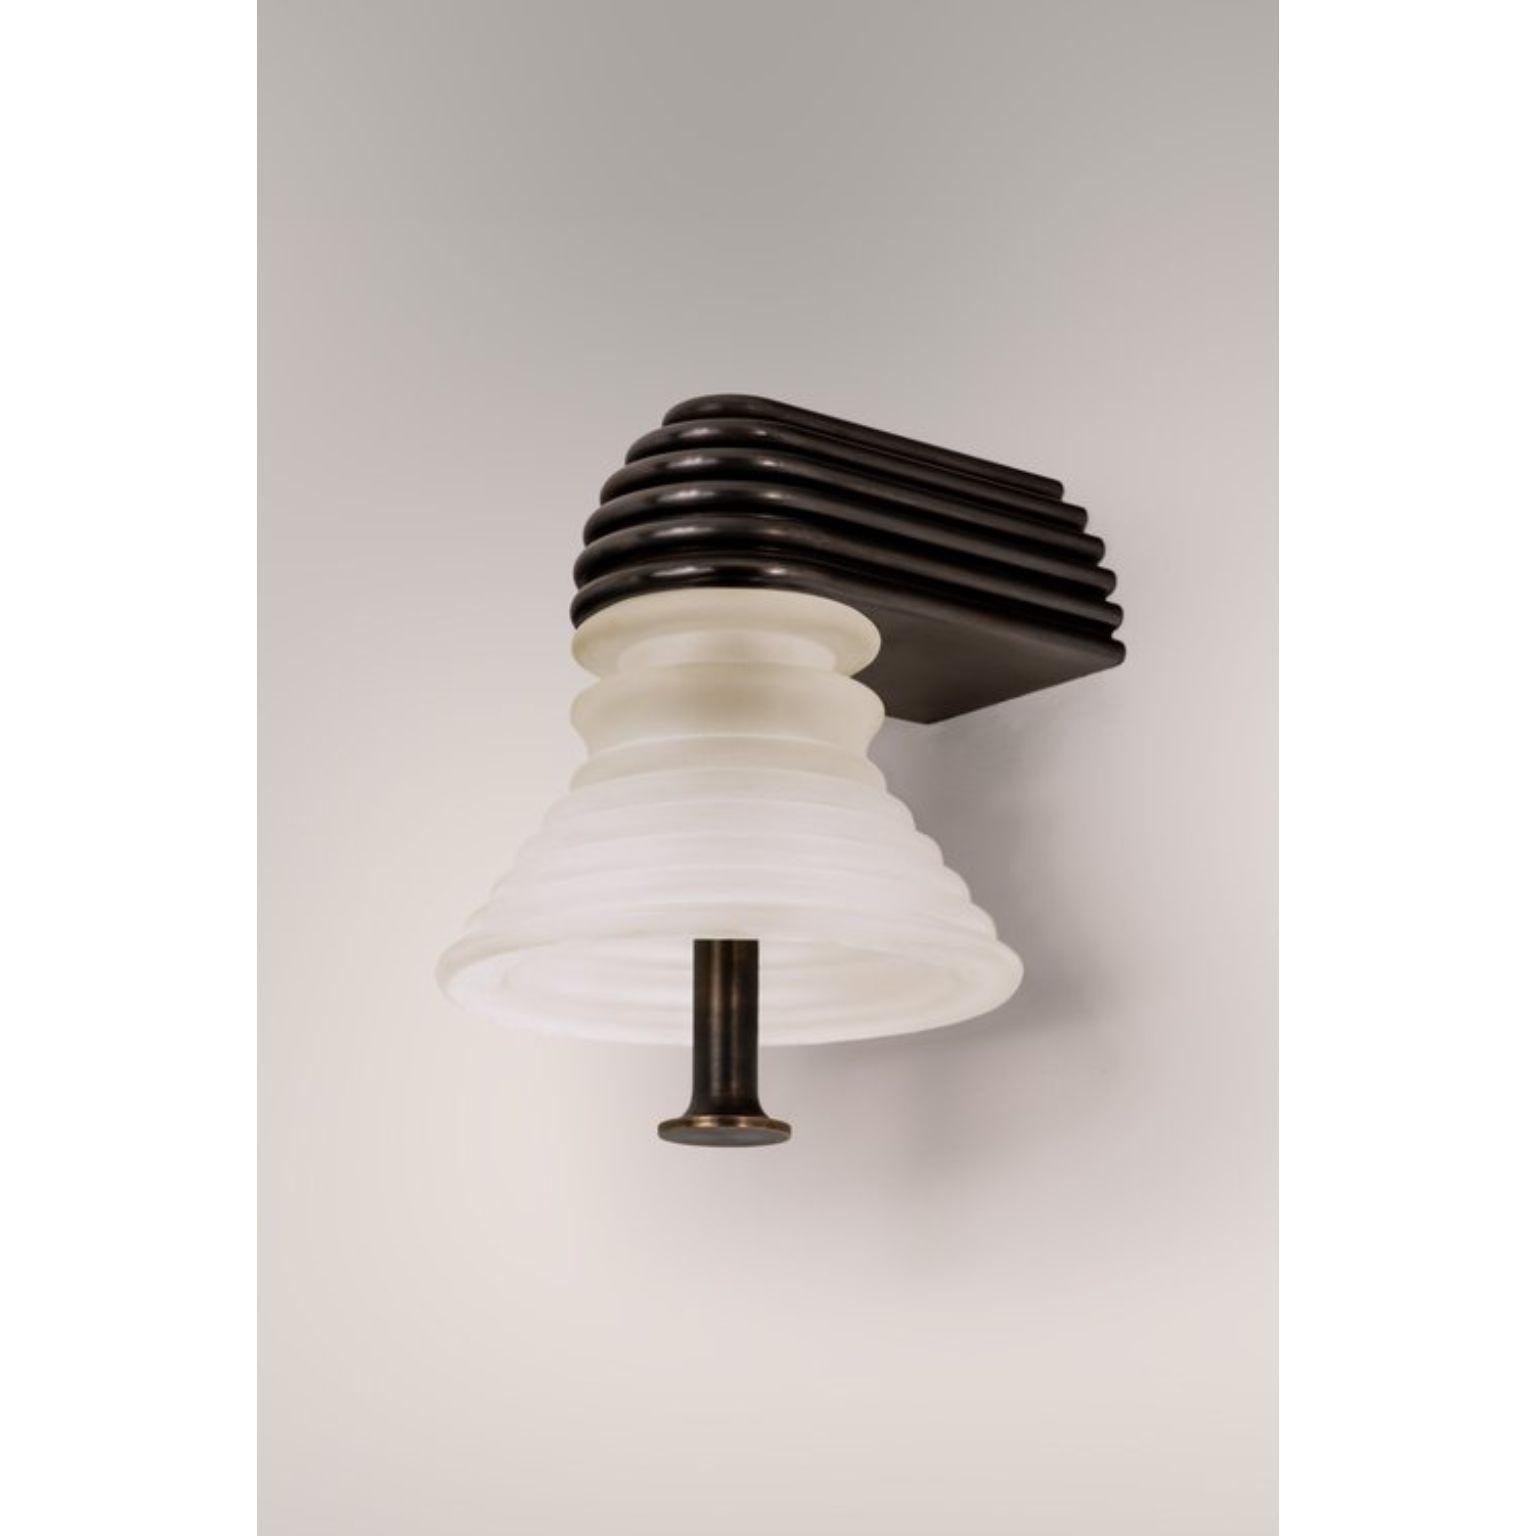 Insulator A Frosted Glass and Dark Brass Sconce by Novocastrian
Dimensions: Ø 14 x H 21 cm.
Materials: Frosted glass and dark brass.  

All products are available in custom dimensions and finishes. Rods can be cut to length or provided at longer